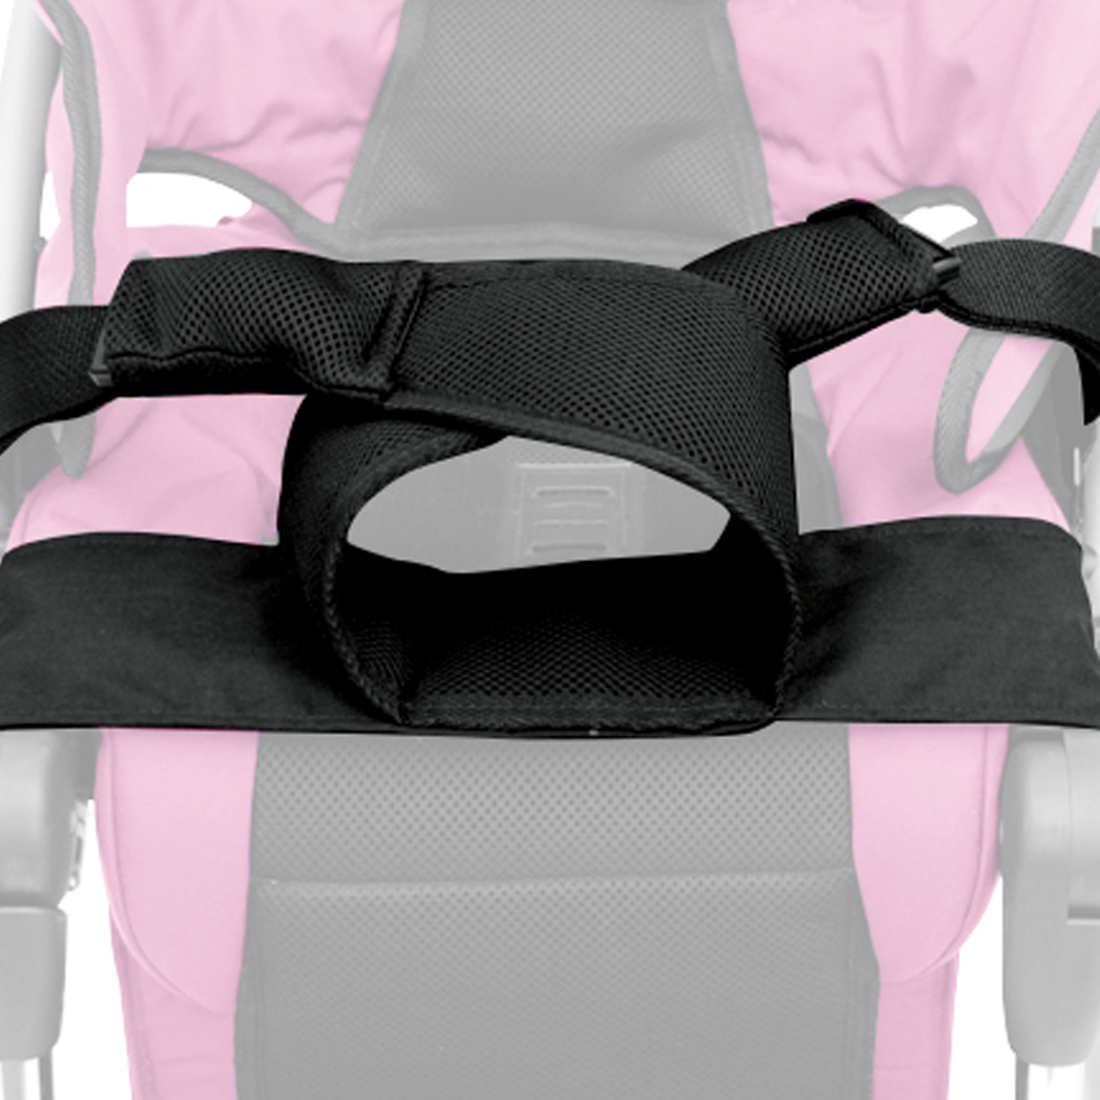 _Rodeo-Leg-Positioning-Lateral-Thigh-Support-Adductor-1000x1000.jpg